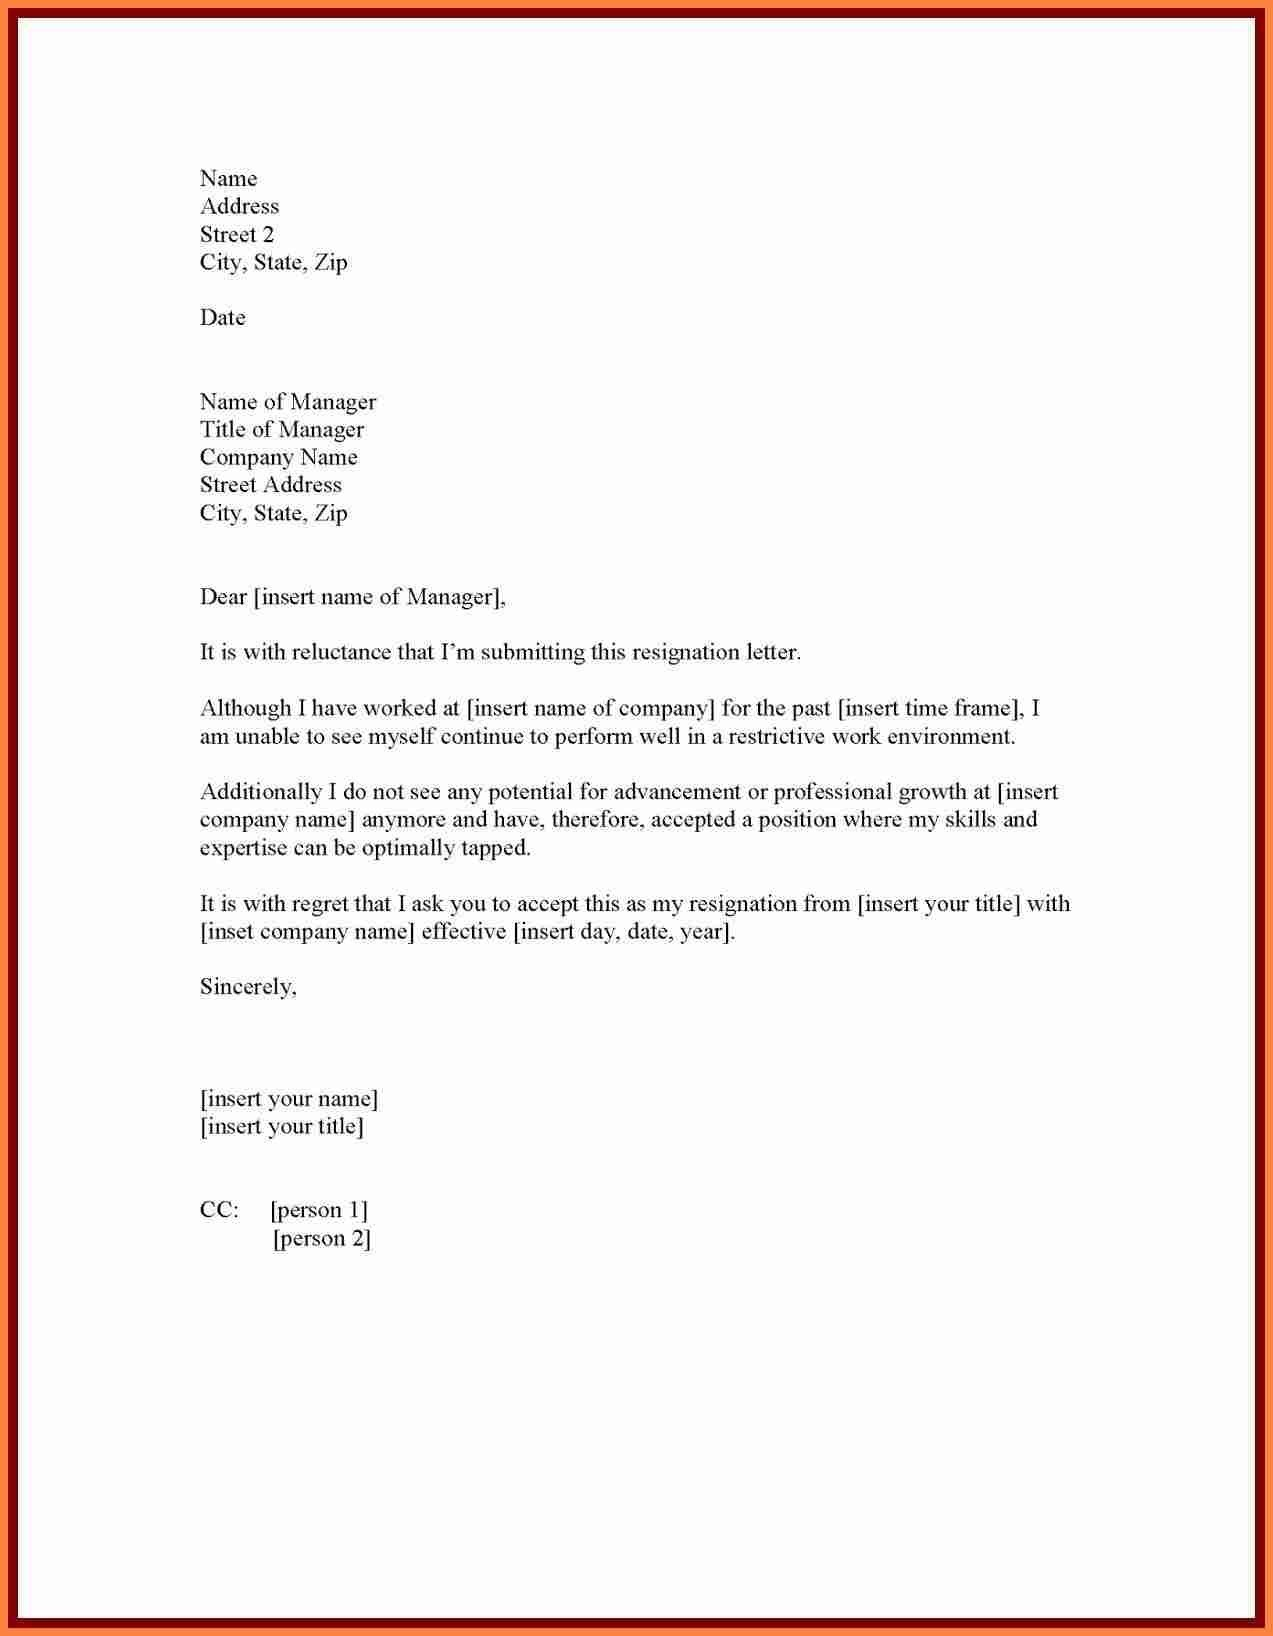 notice letter template Collection-formal resignation letter template one mont new formal resignation letter template one month notice copy cards 17-m